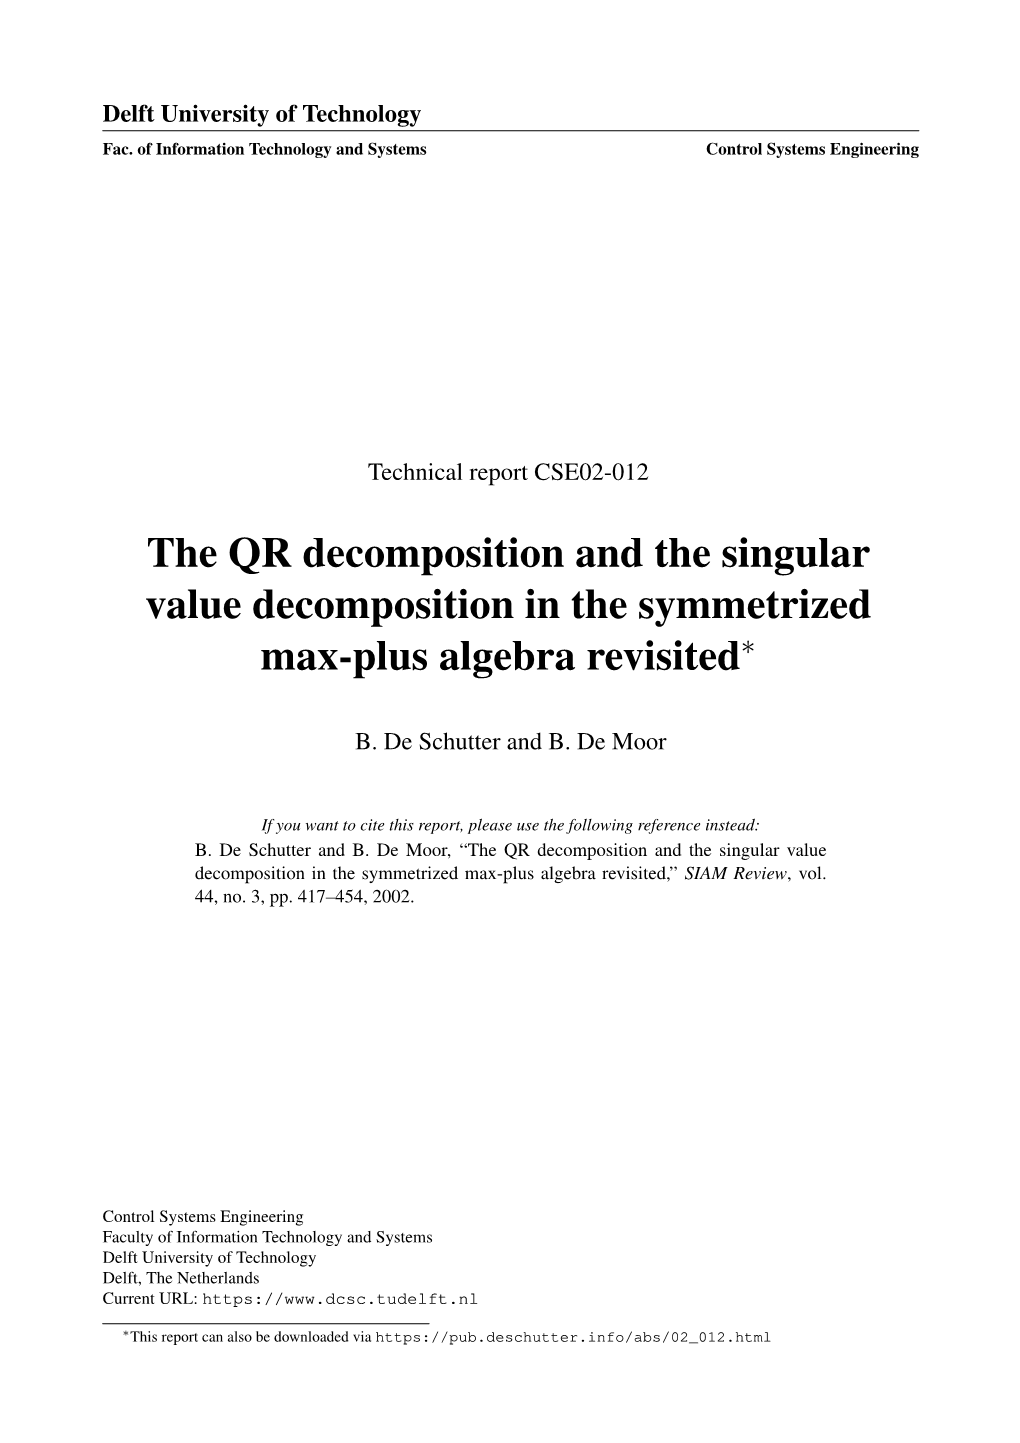 The QR Decomposition and the Singular Value Decomposition in the Symmetrized Max-Plus Algebra Revisited∗